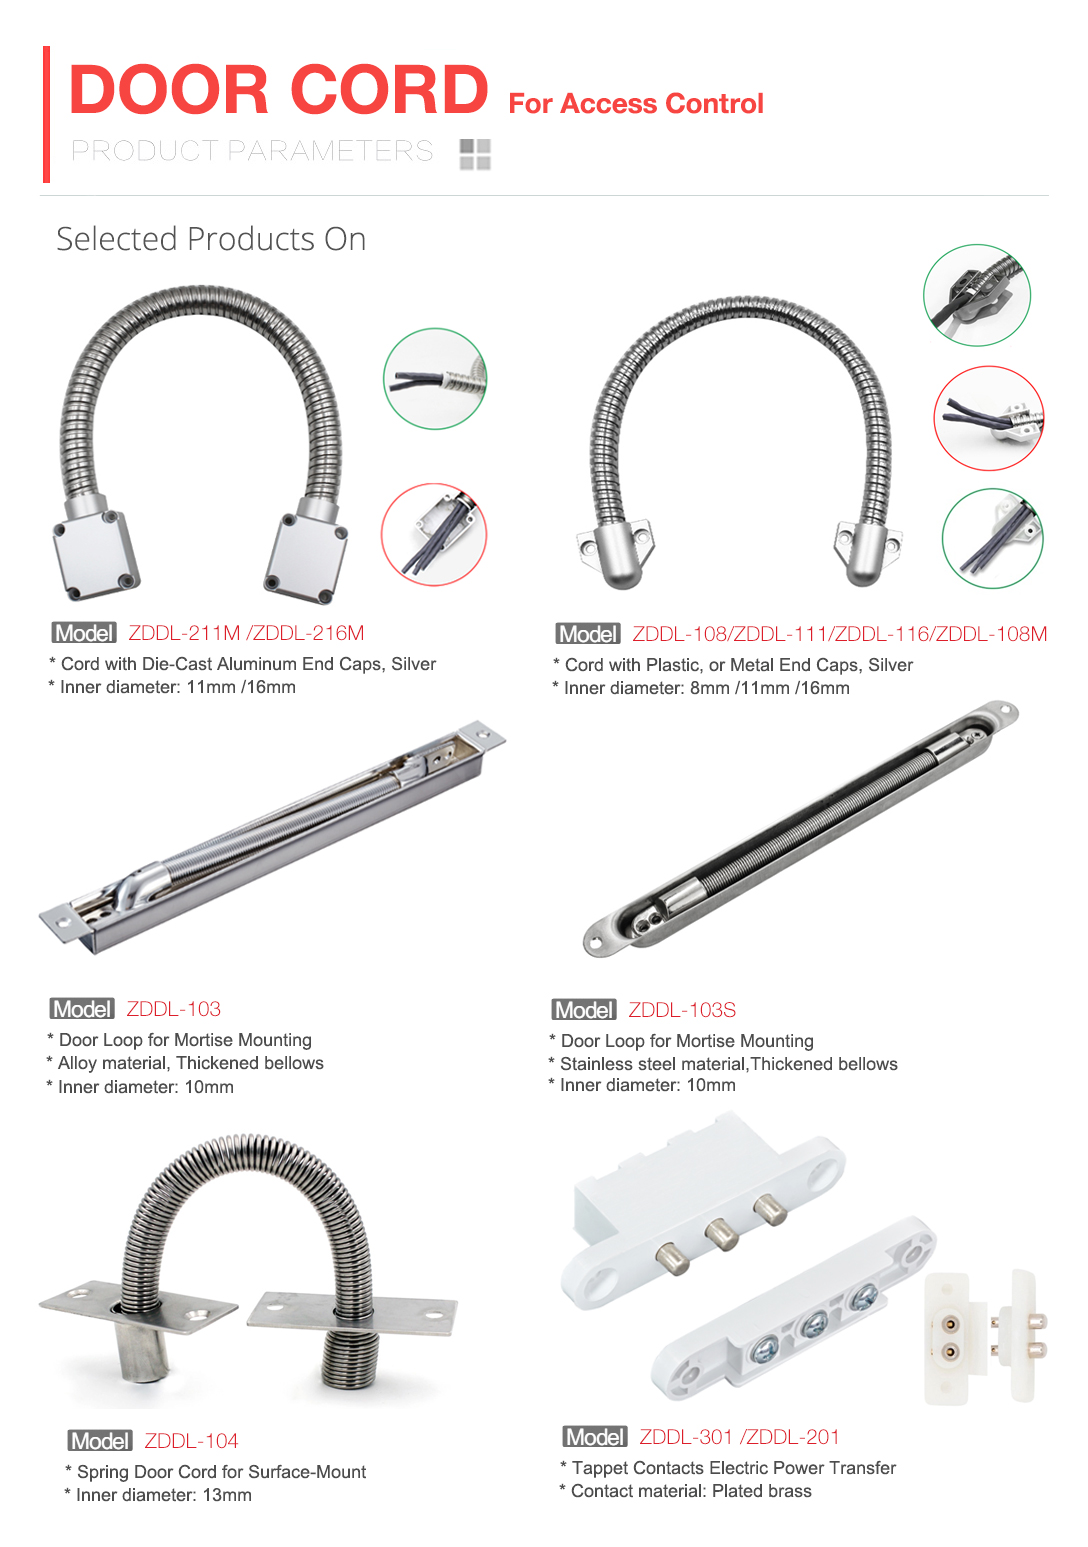 Armored Door Cord for Surface-Mount(图1)